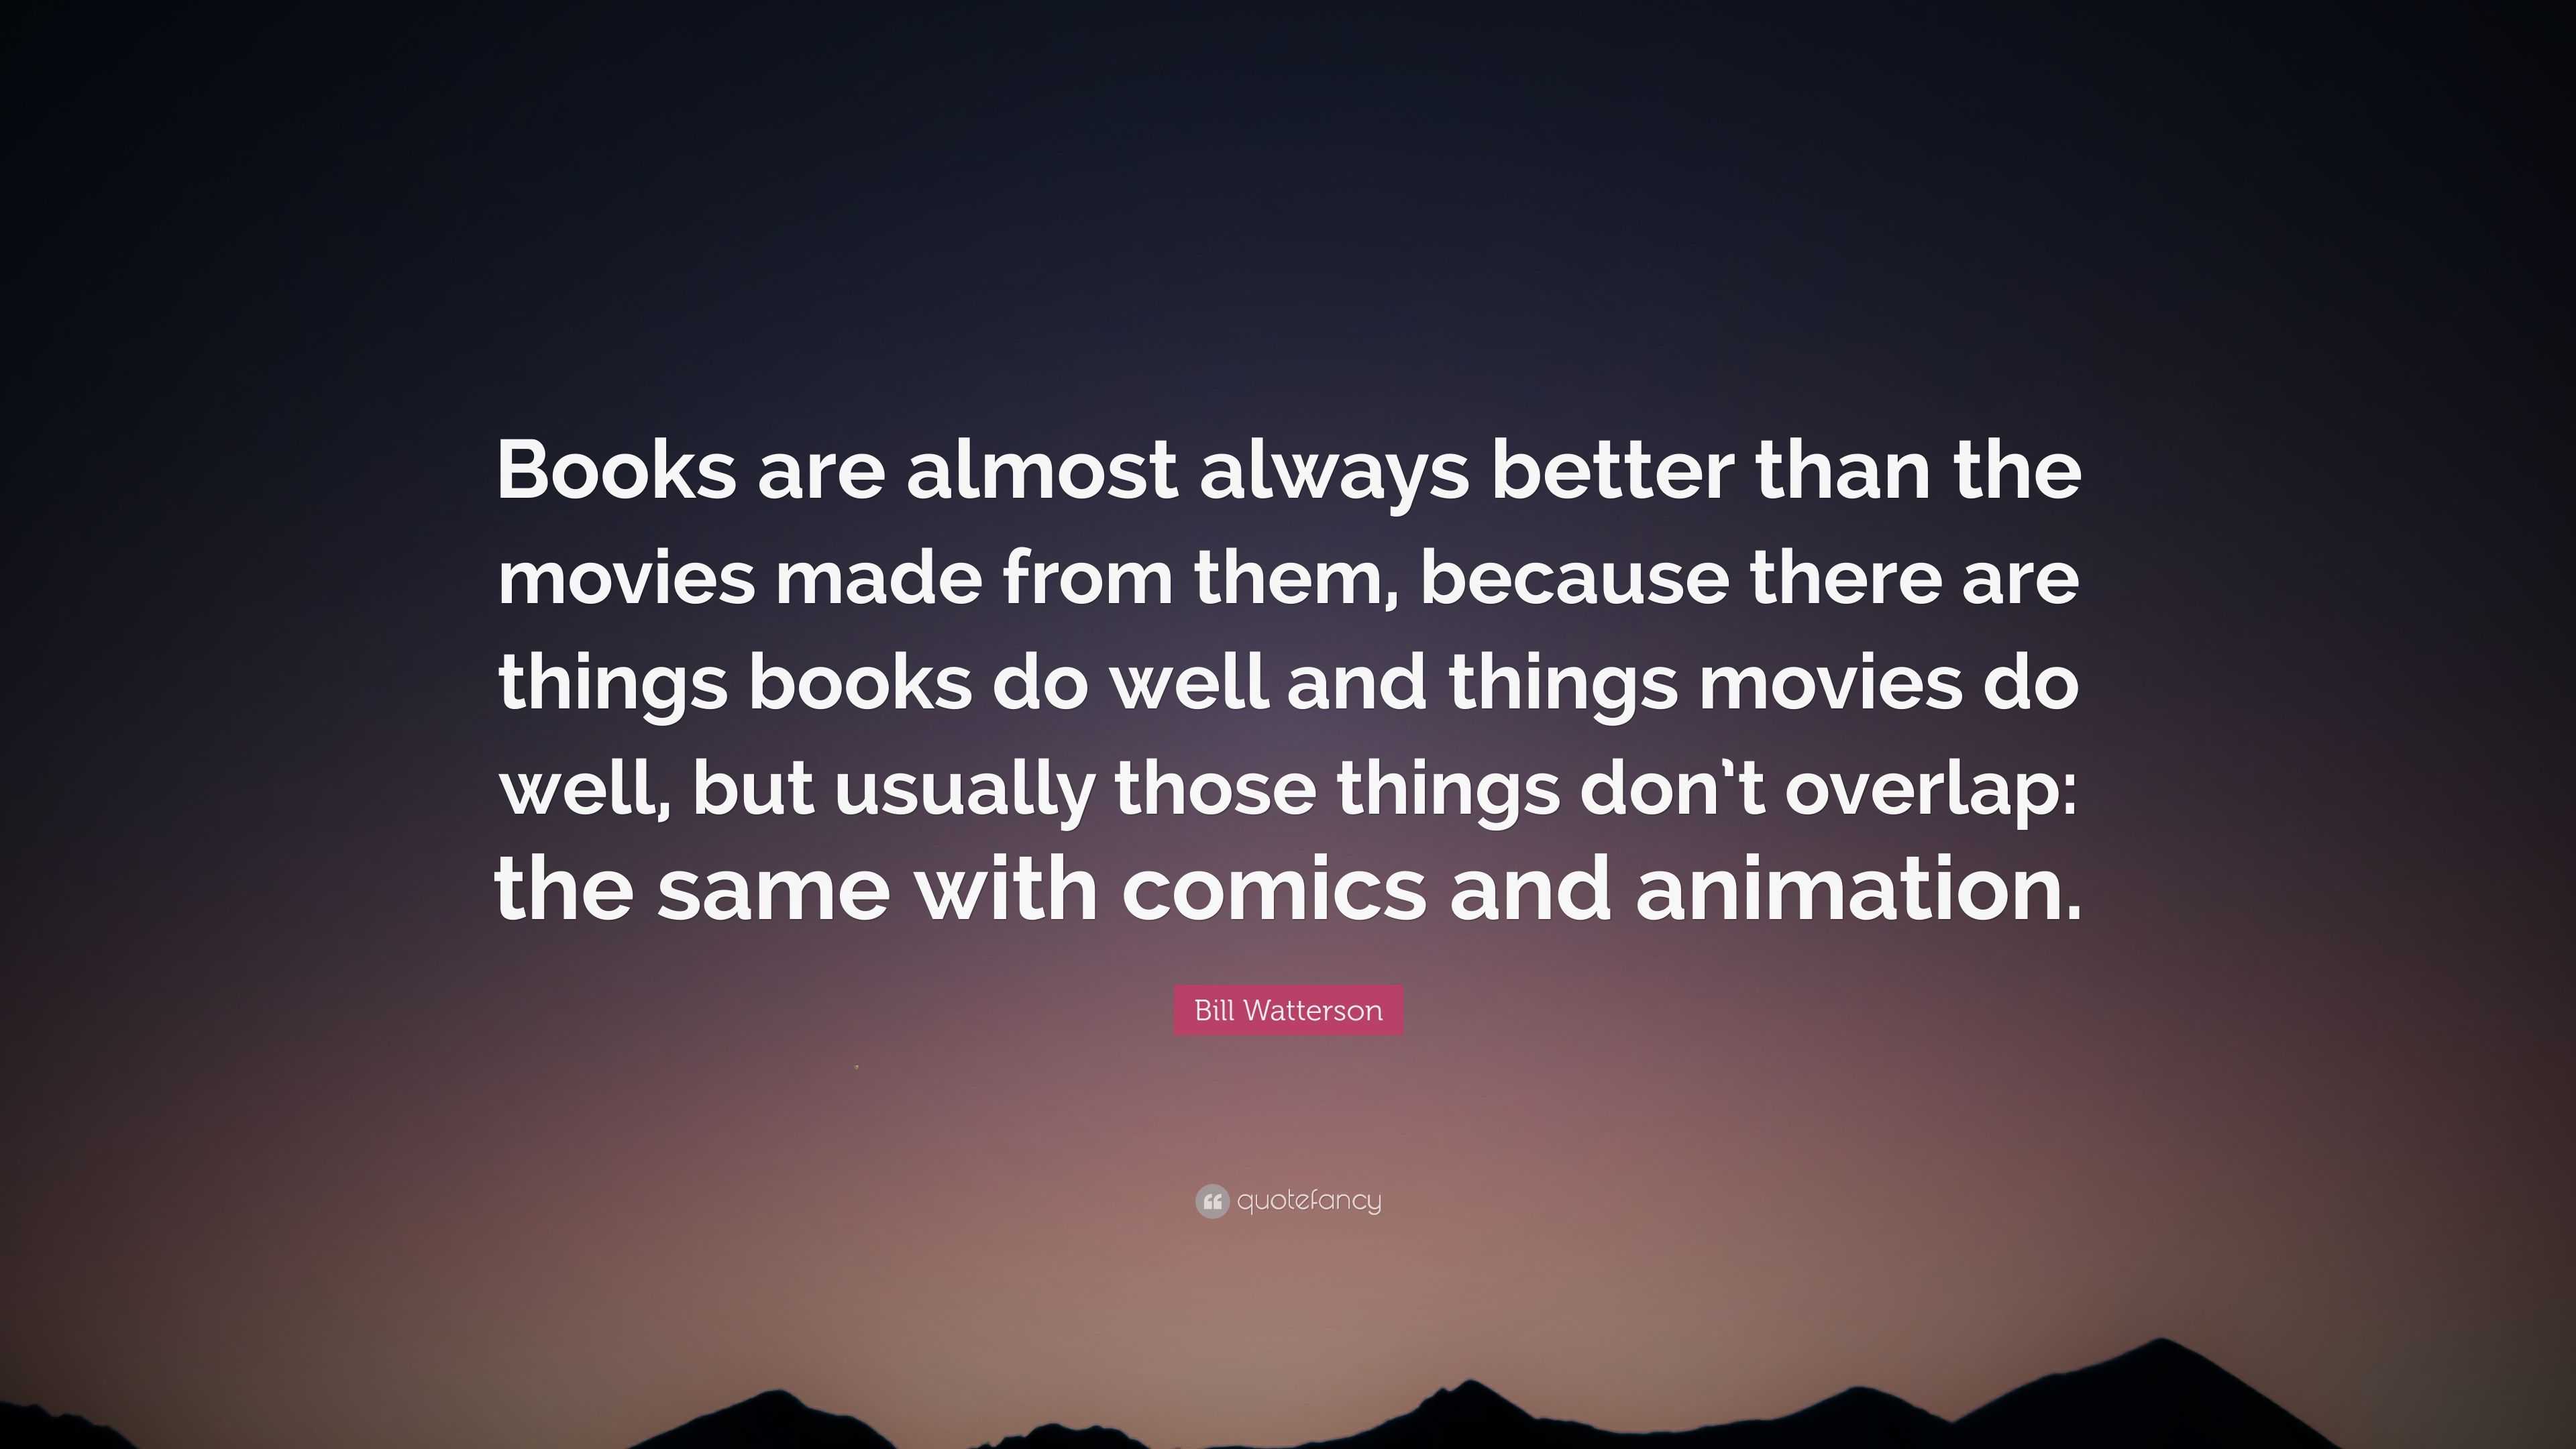 Bill Watterson Quote: “Books are almost always better than the movies made  from them, because there are things books do well and things movies ”